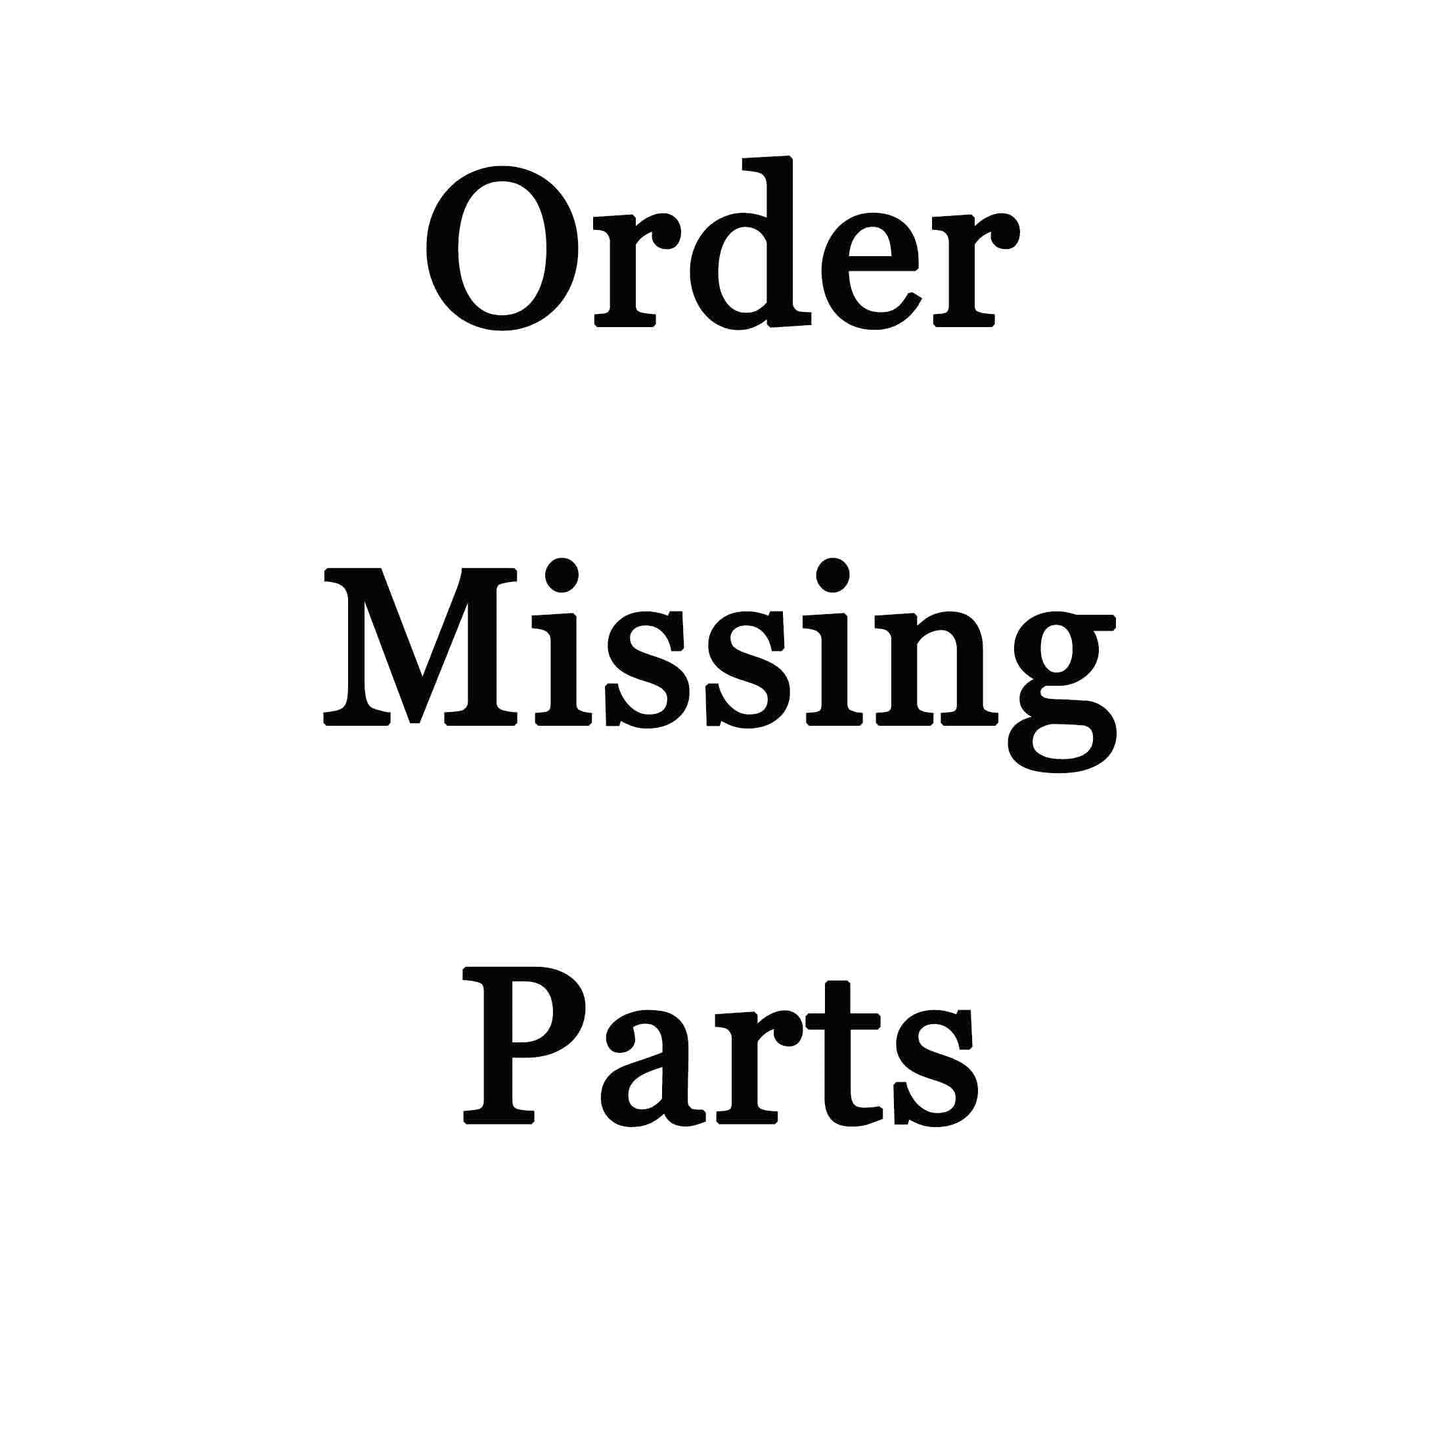 Order missing Clothing, Body Parts, etc. - FromPicToArt